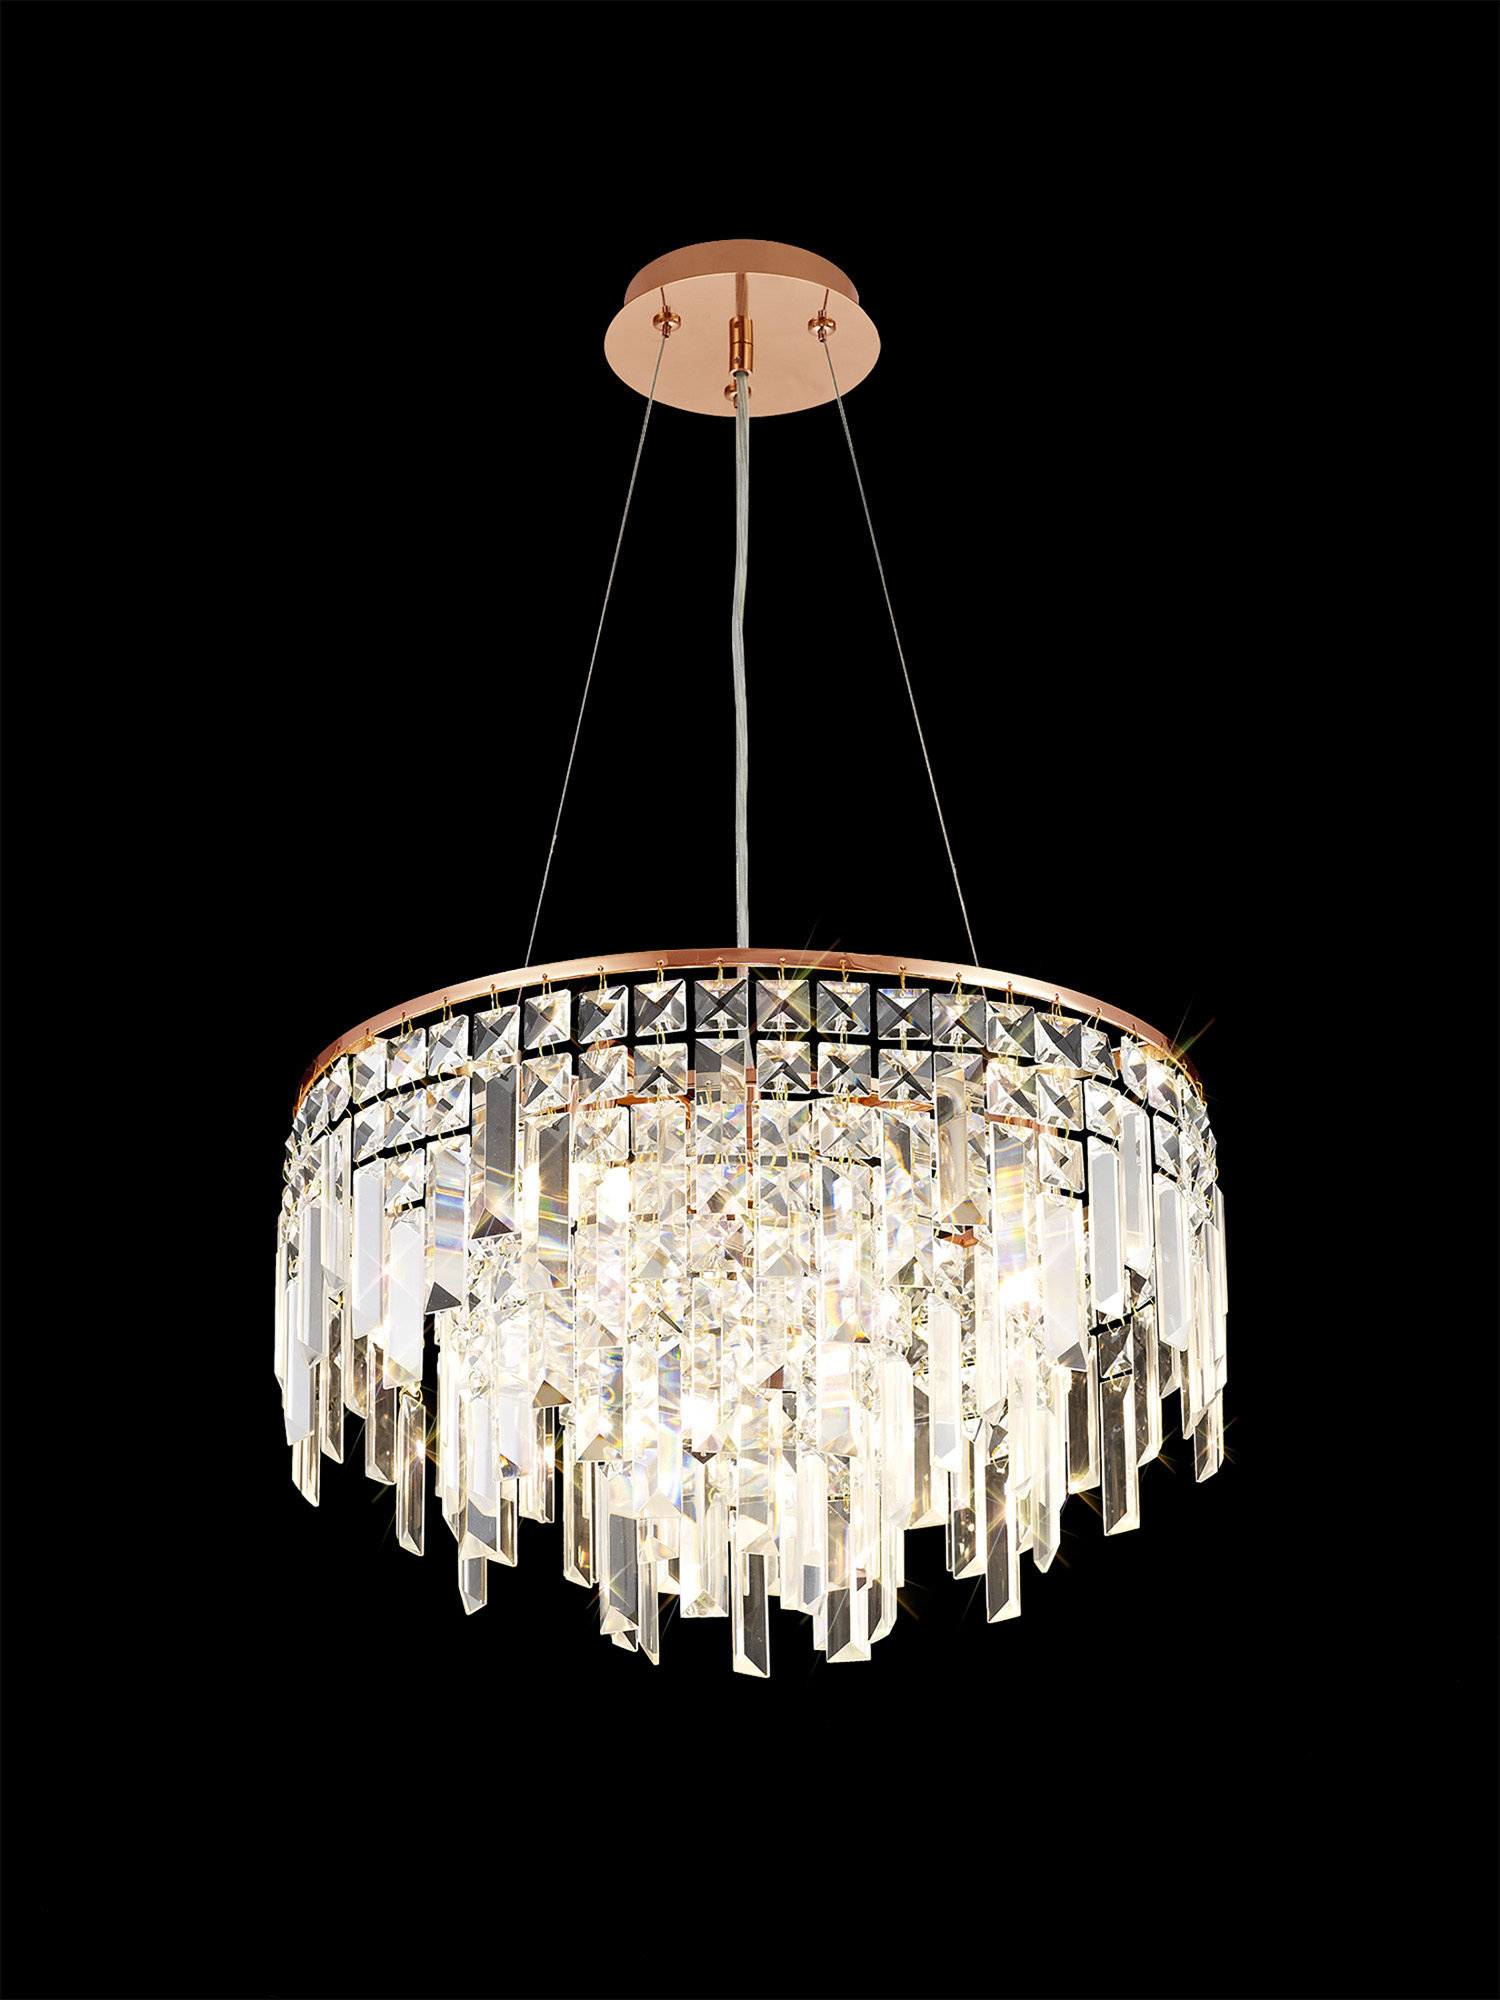 Maddison Crystal Ceiling Lights Diyas Ringed & Square Crystal Fittings